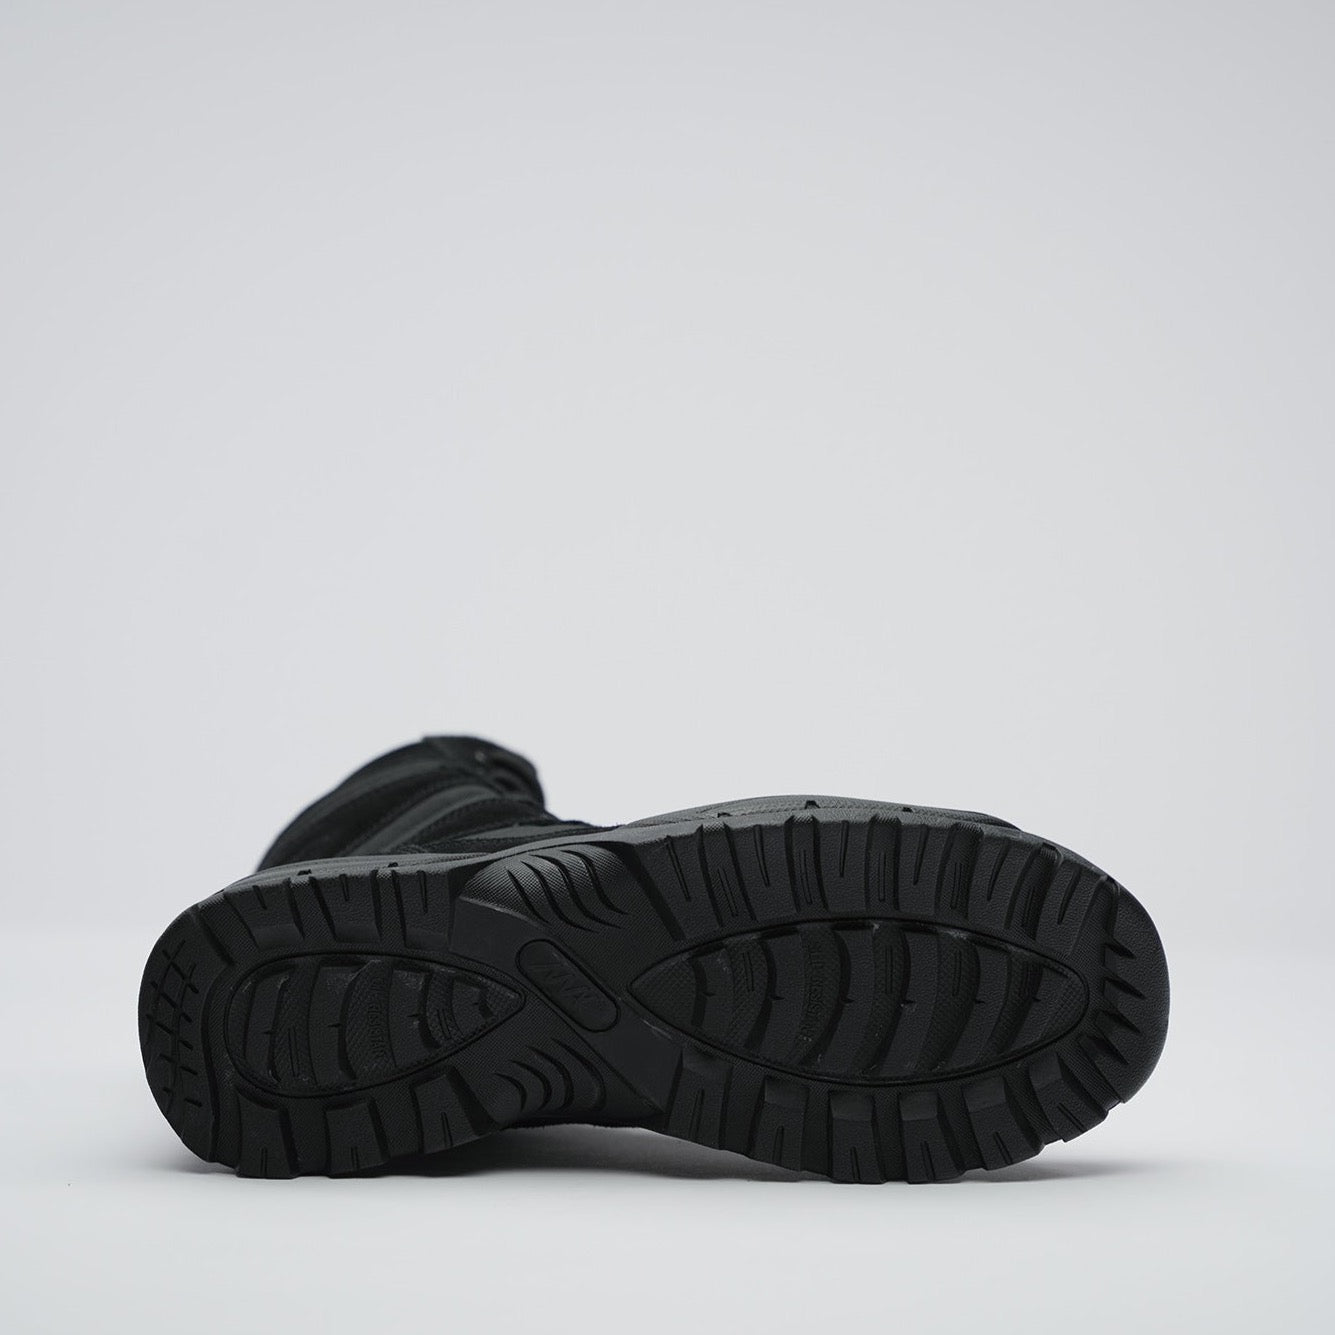 view of rubber sole with mak logo in the middle and slip resistant sole